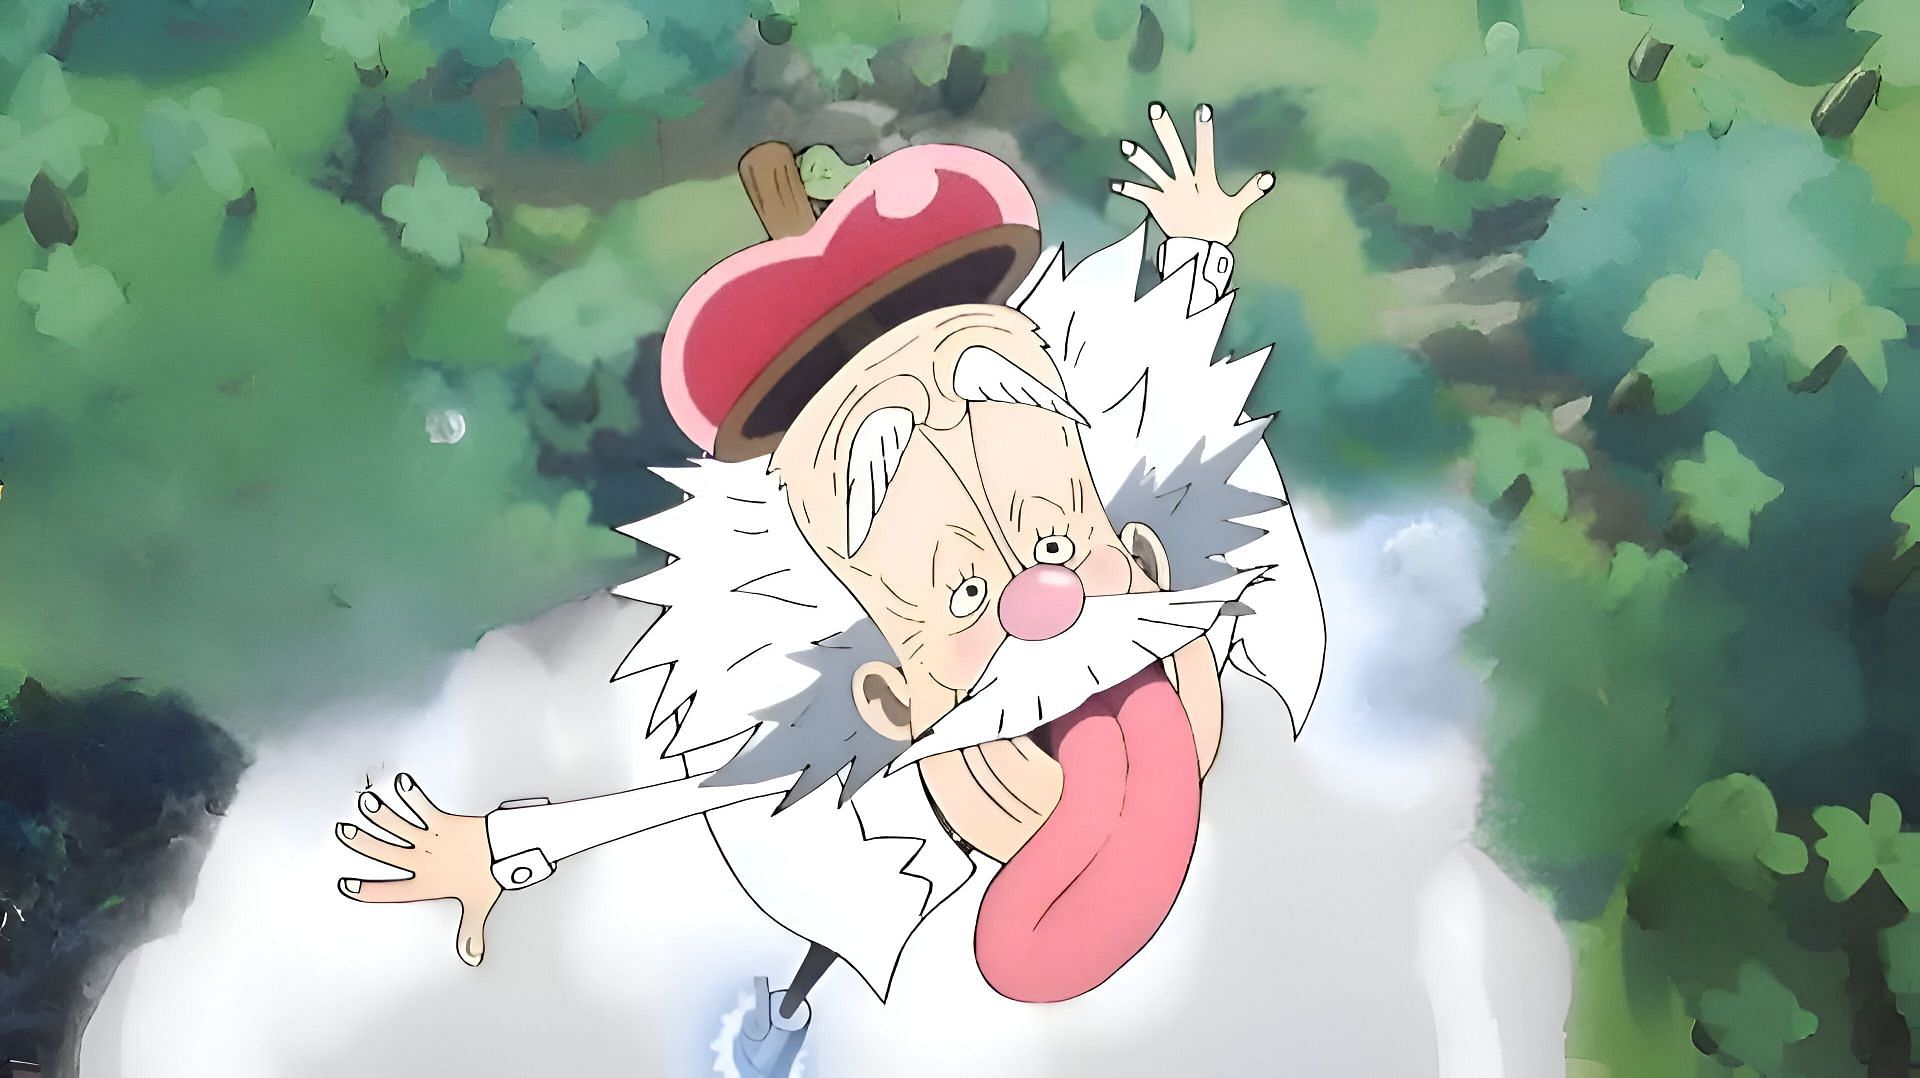 Vegapunk as seen in the anime (Image via Toei Animation)